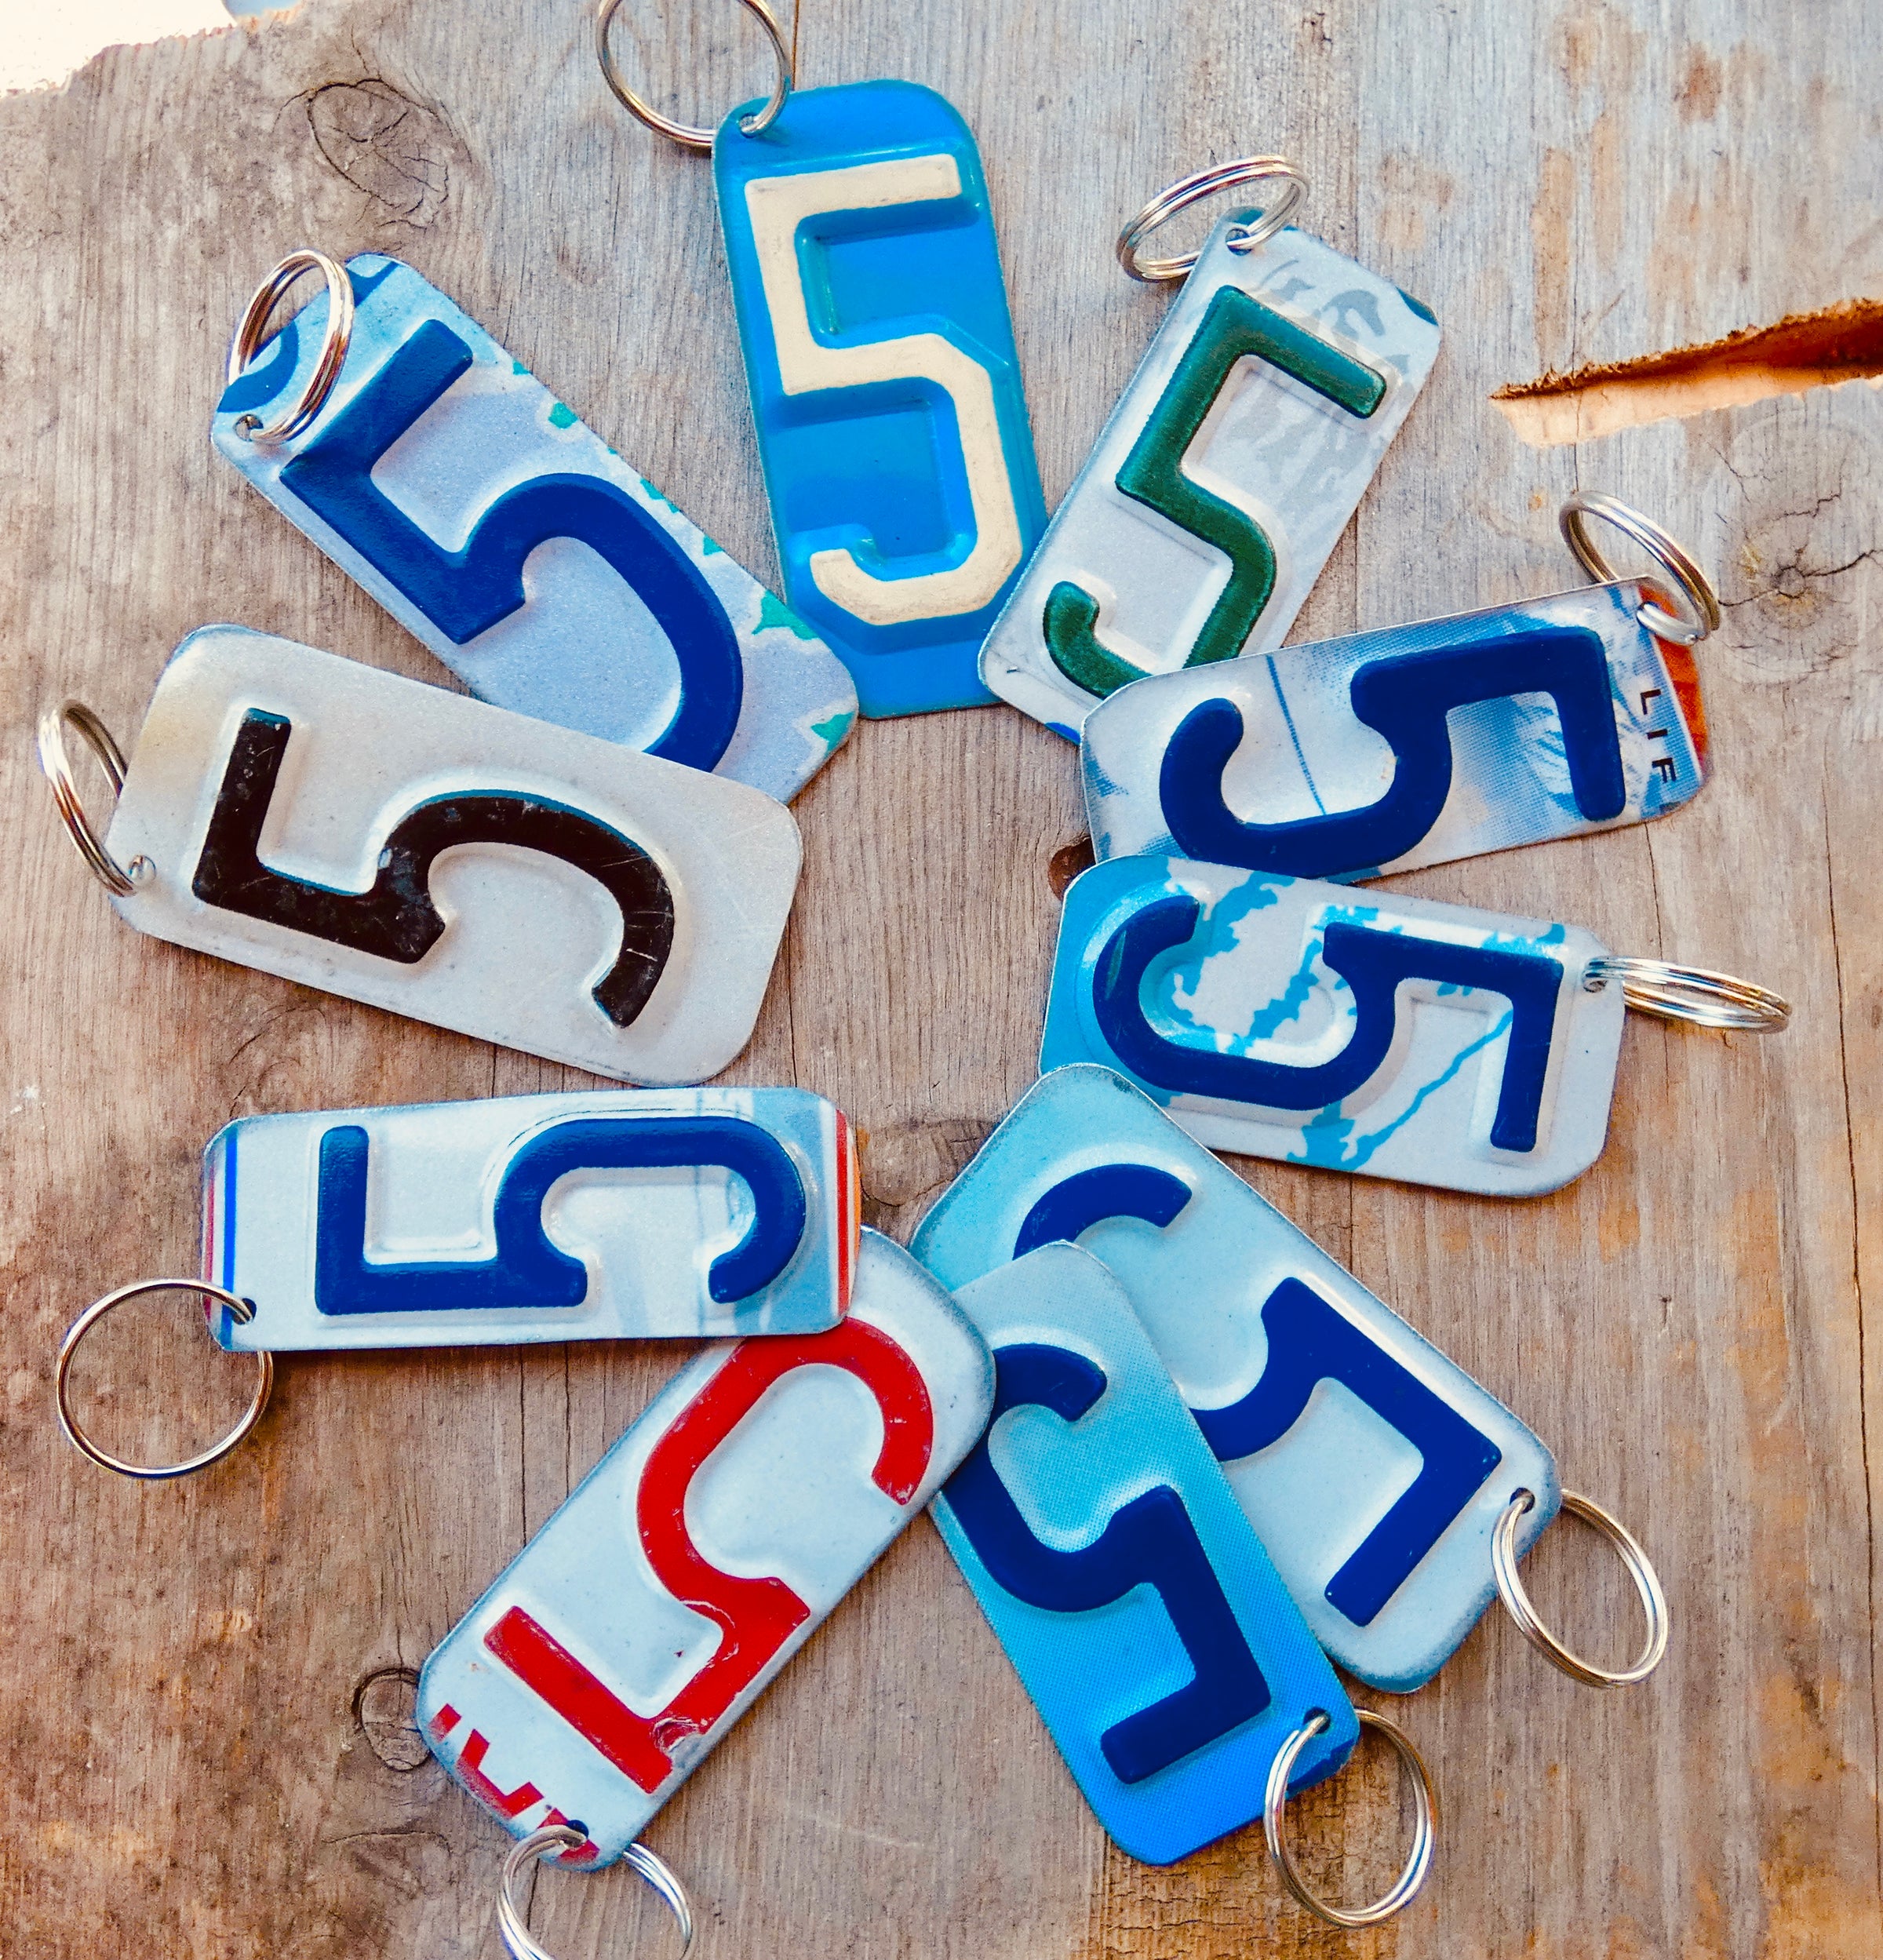 Number 6 Key Chain from repurposed License Plates